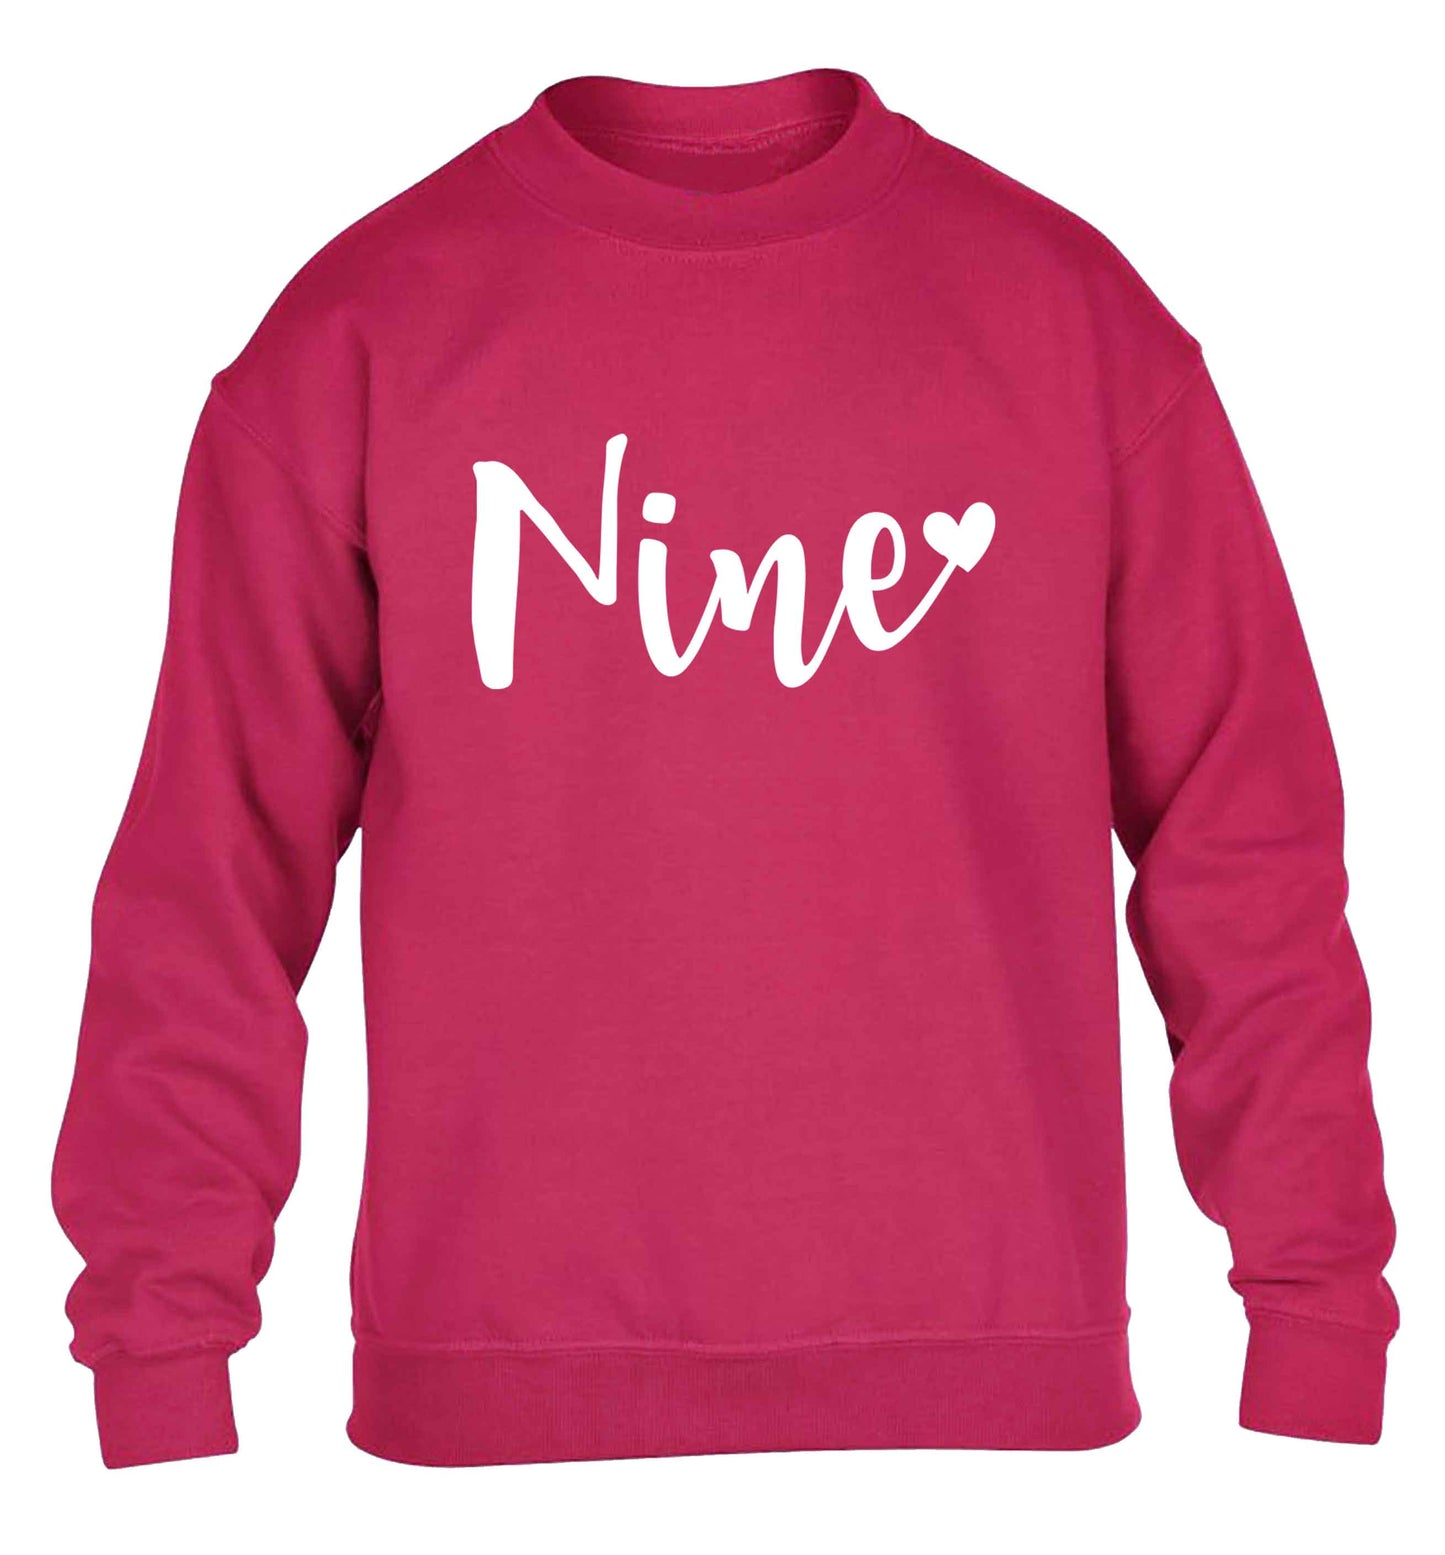 Nine and heart children's pink sweater 12-13 Years